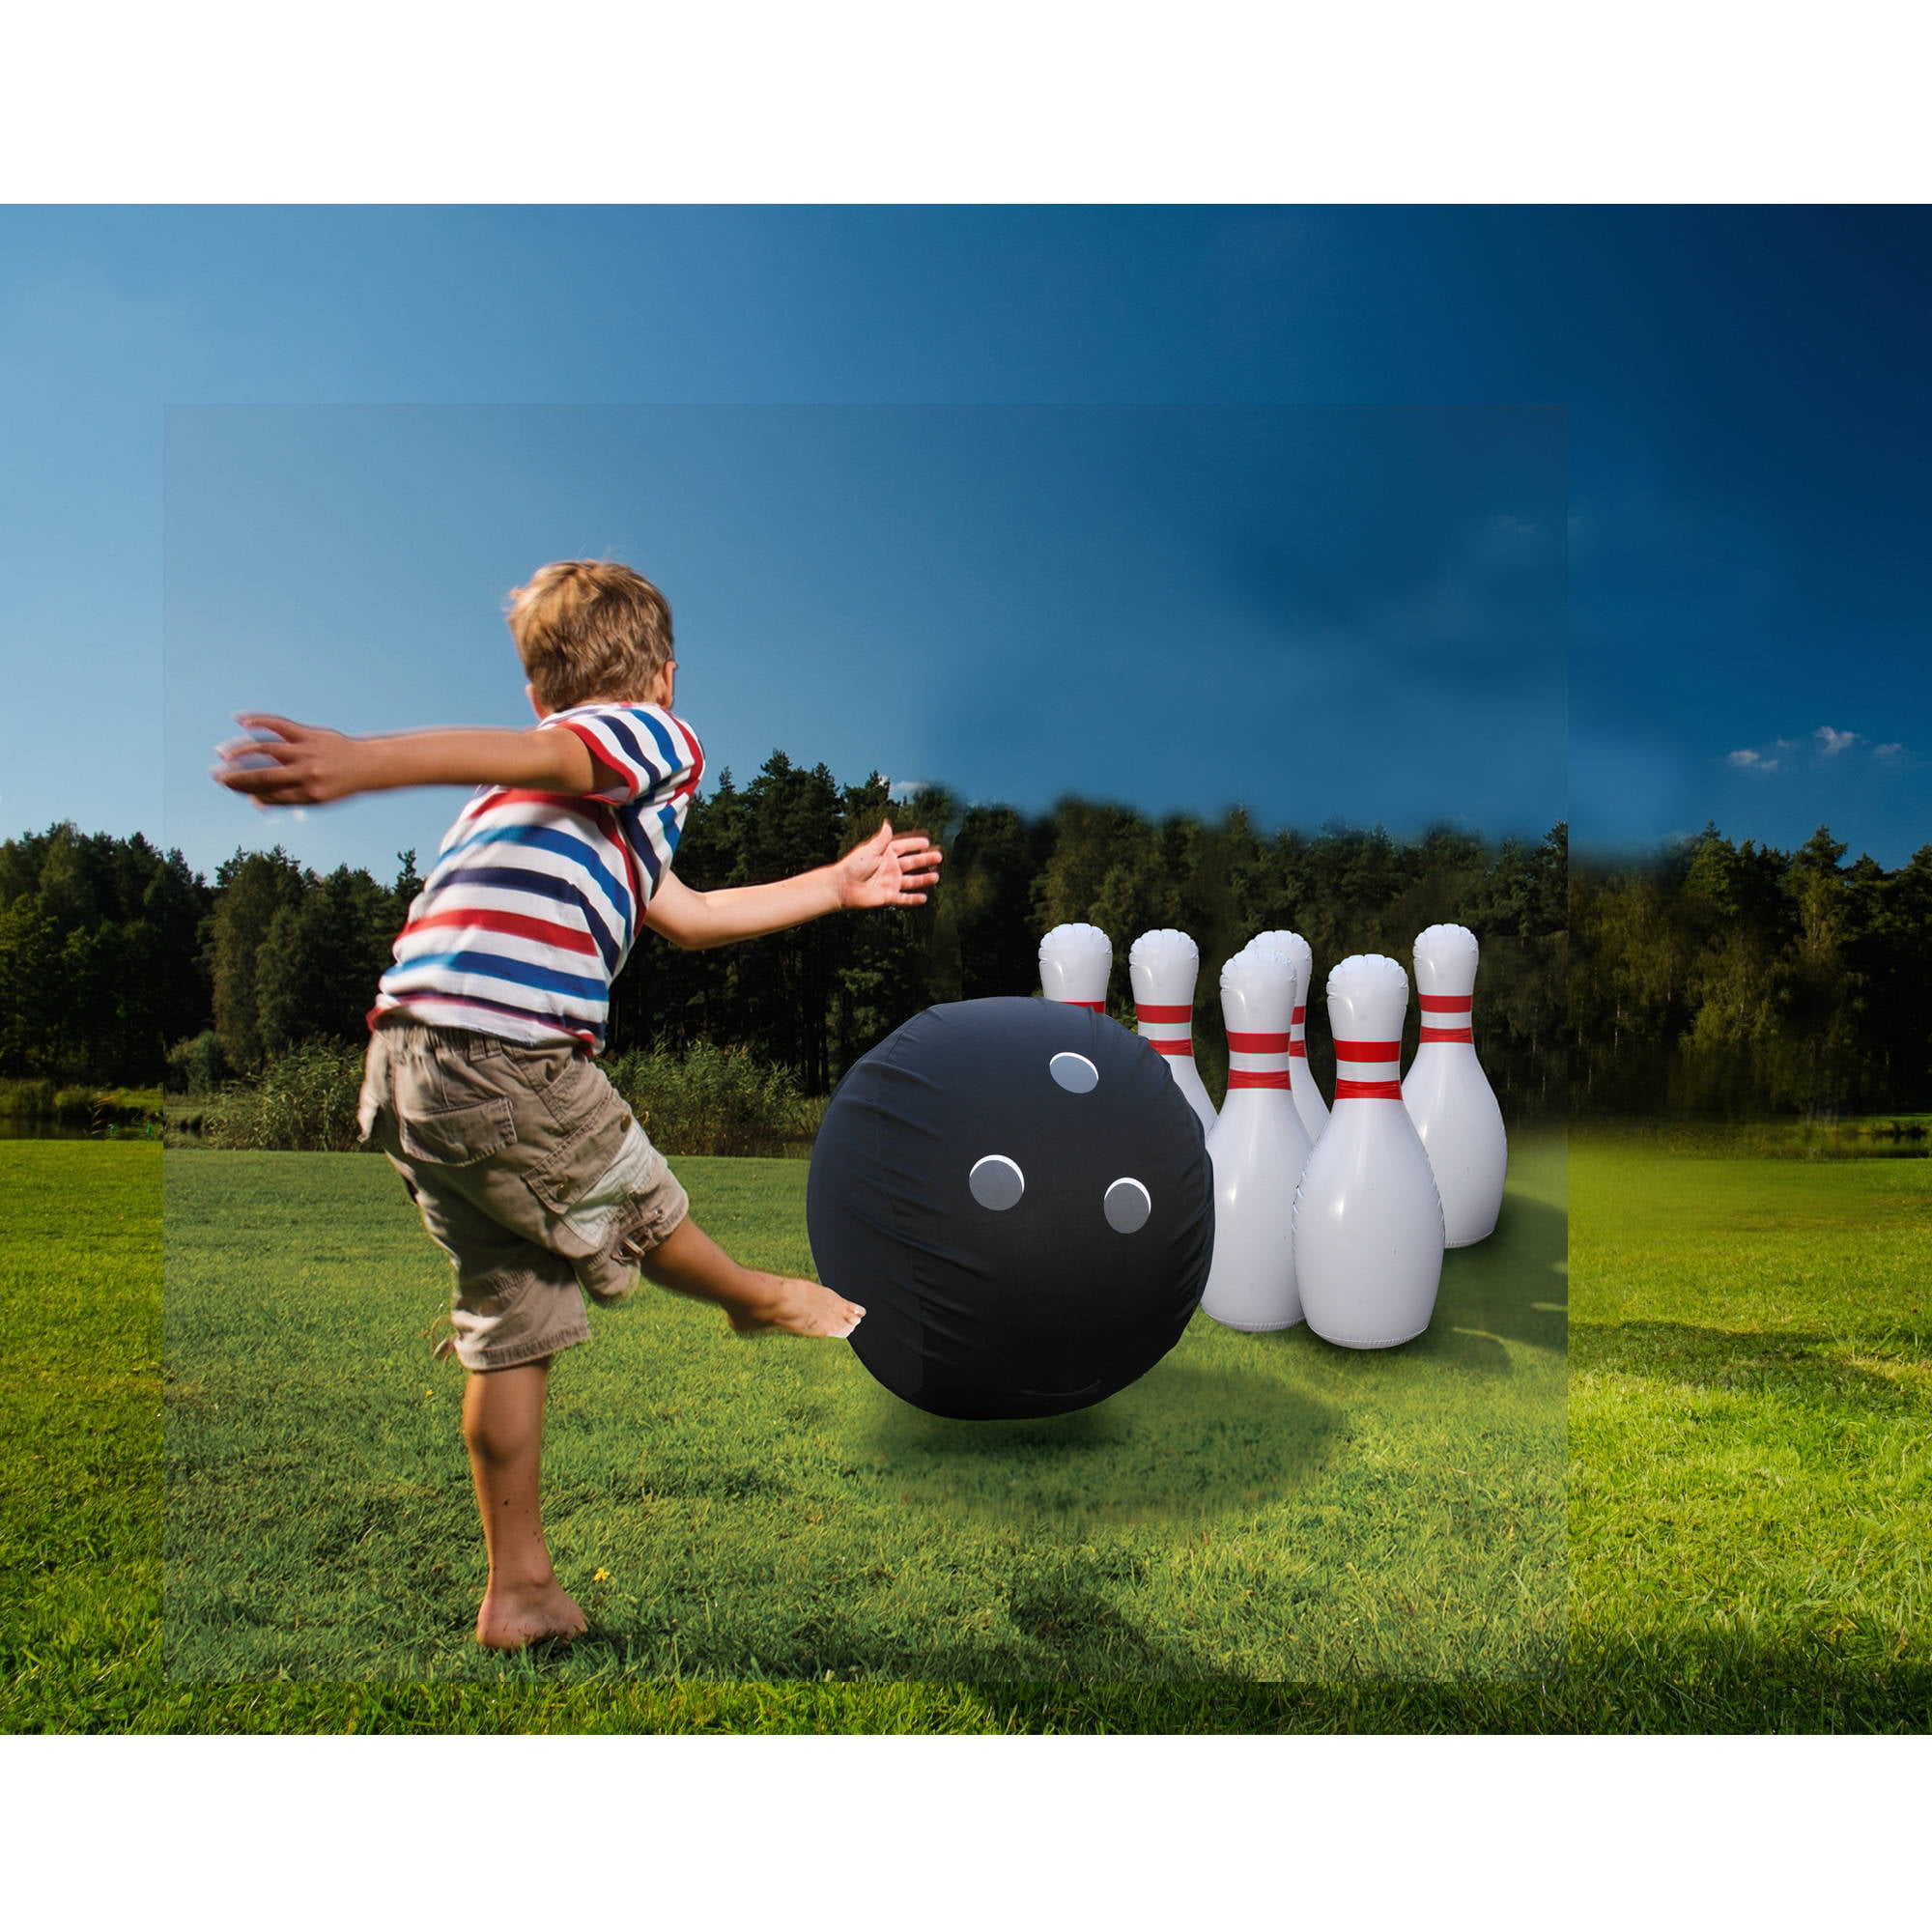 Etna Giant Inflatable Bowling Set Garden Kits Adults Fun Party Games Birthday 